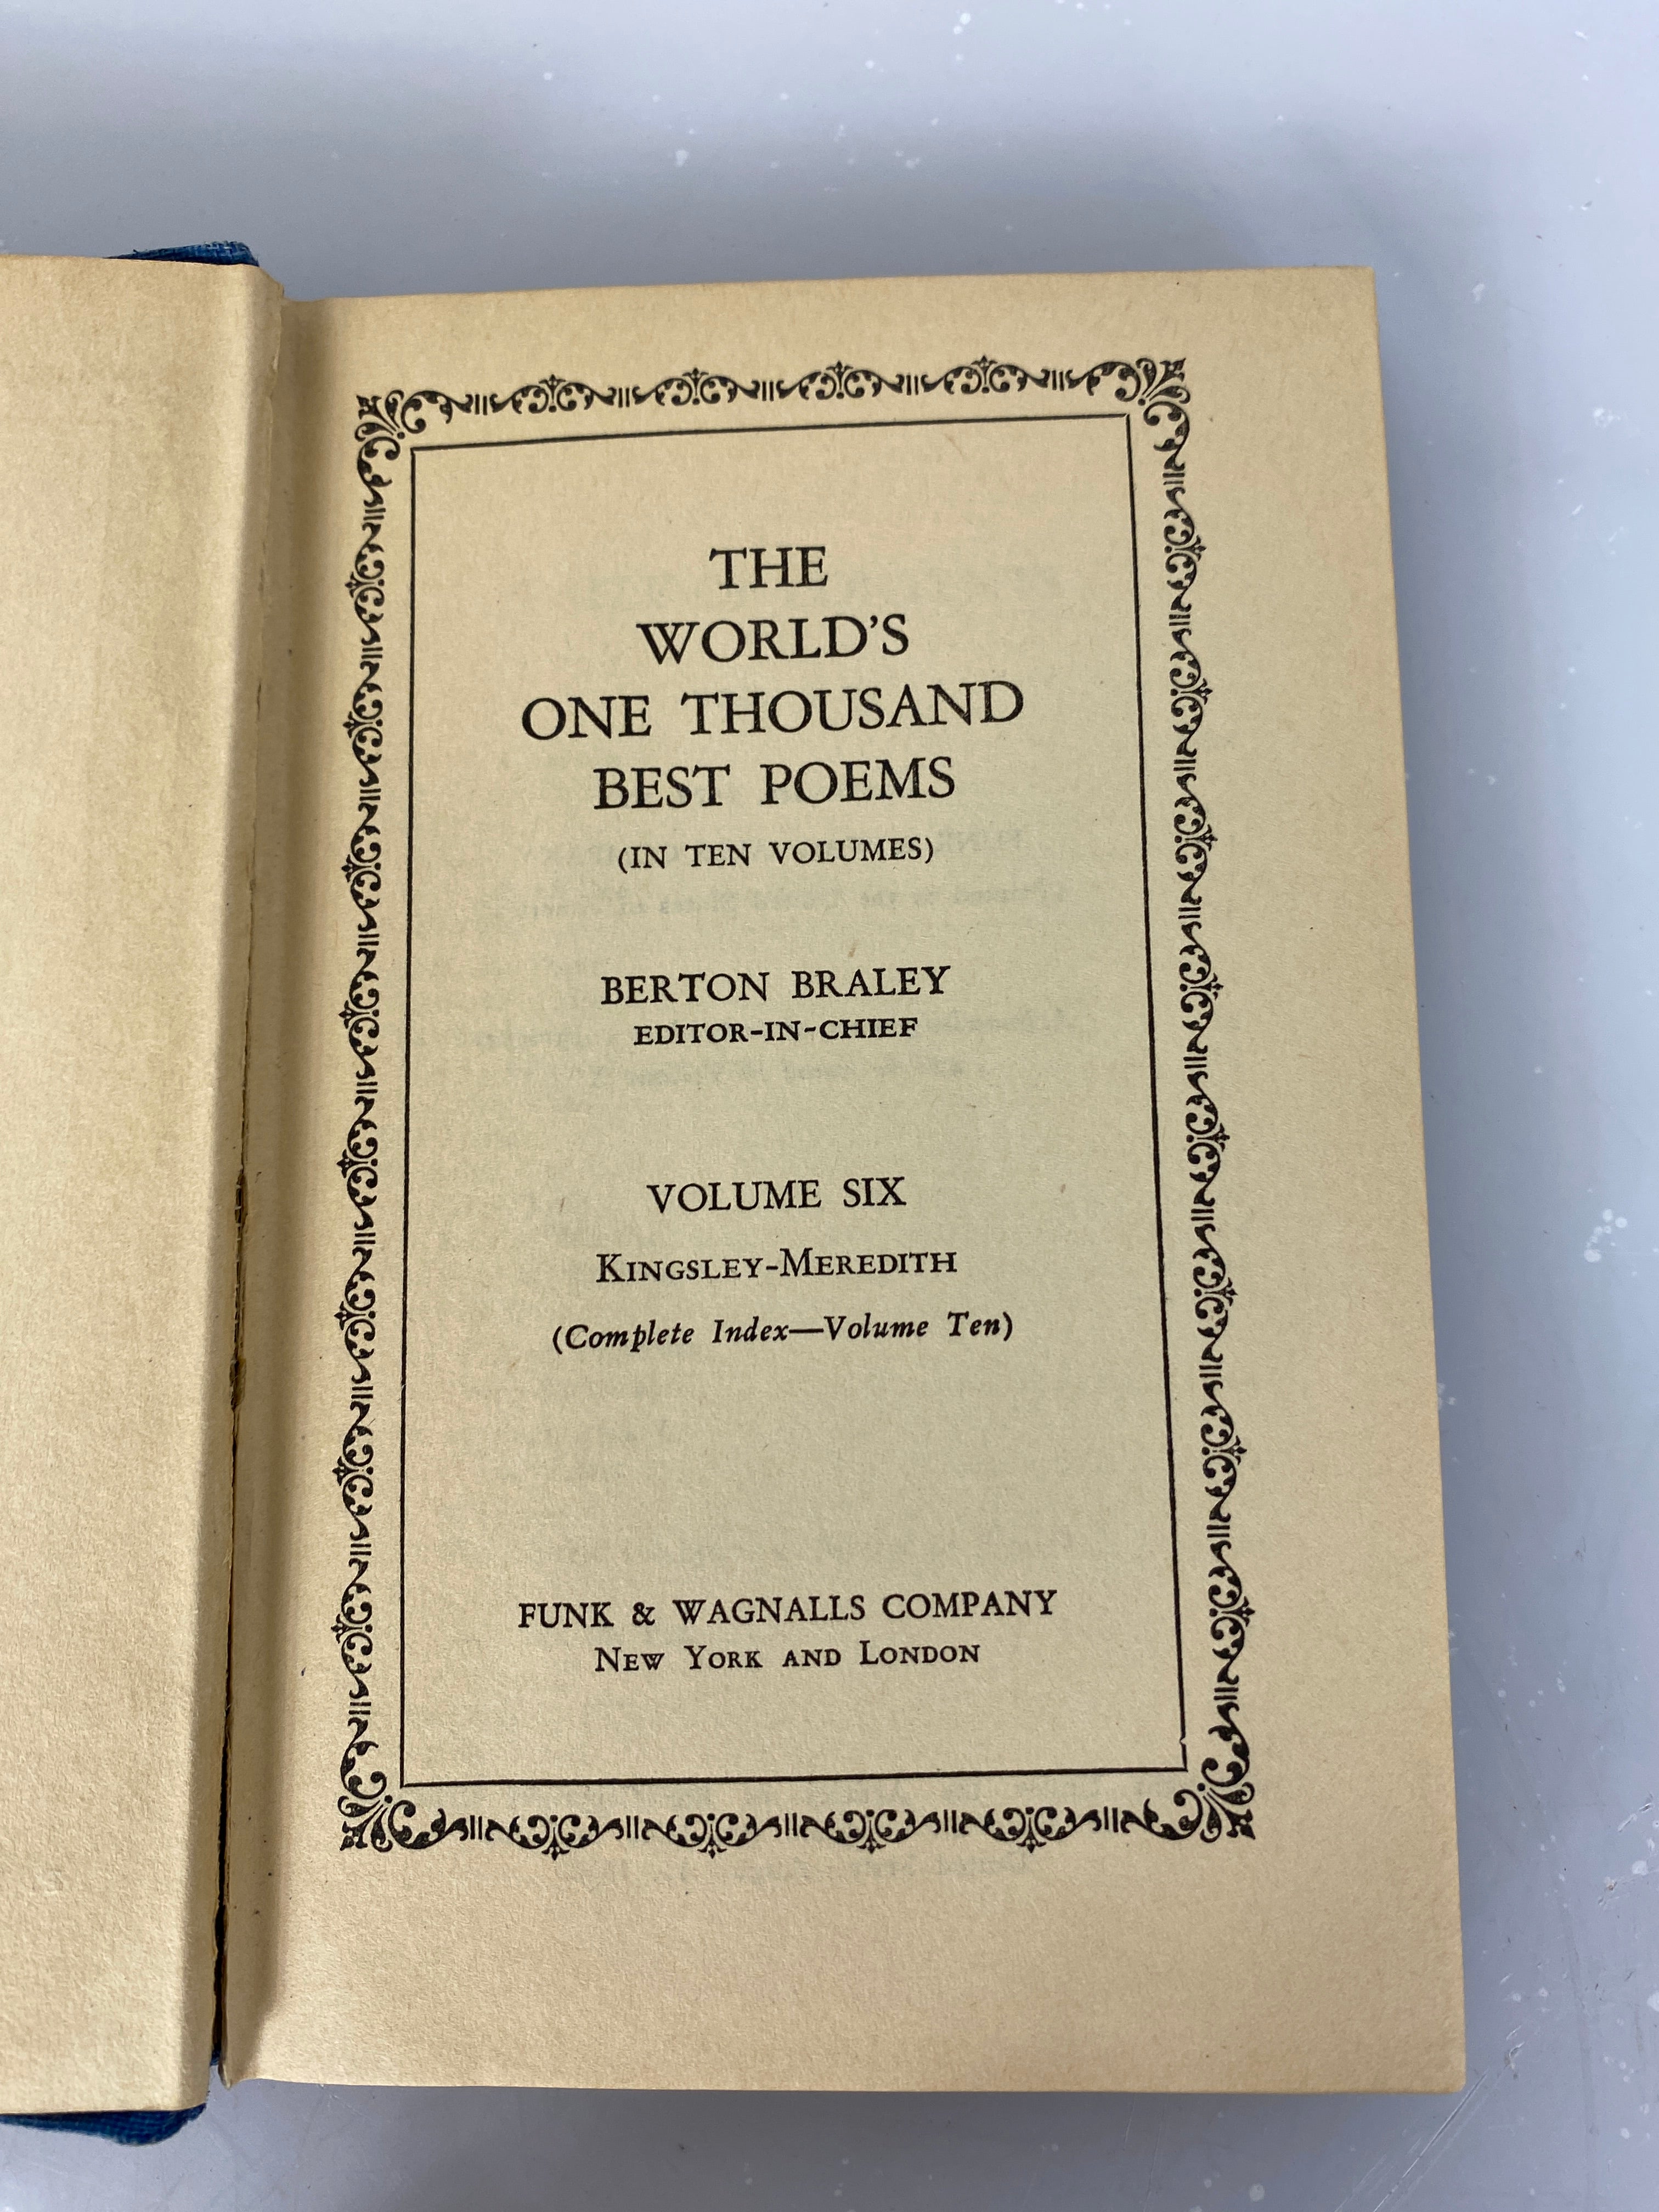 Lot of 5 Volumes of The World's One Thousand Best Poems by Berton Braley (Volumes 2, 5, 6, 7, 8) HC